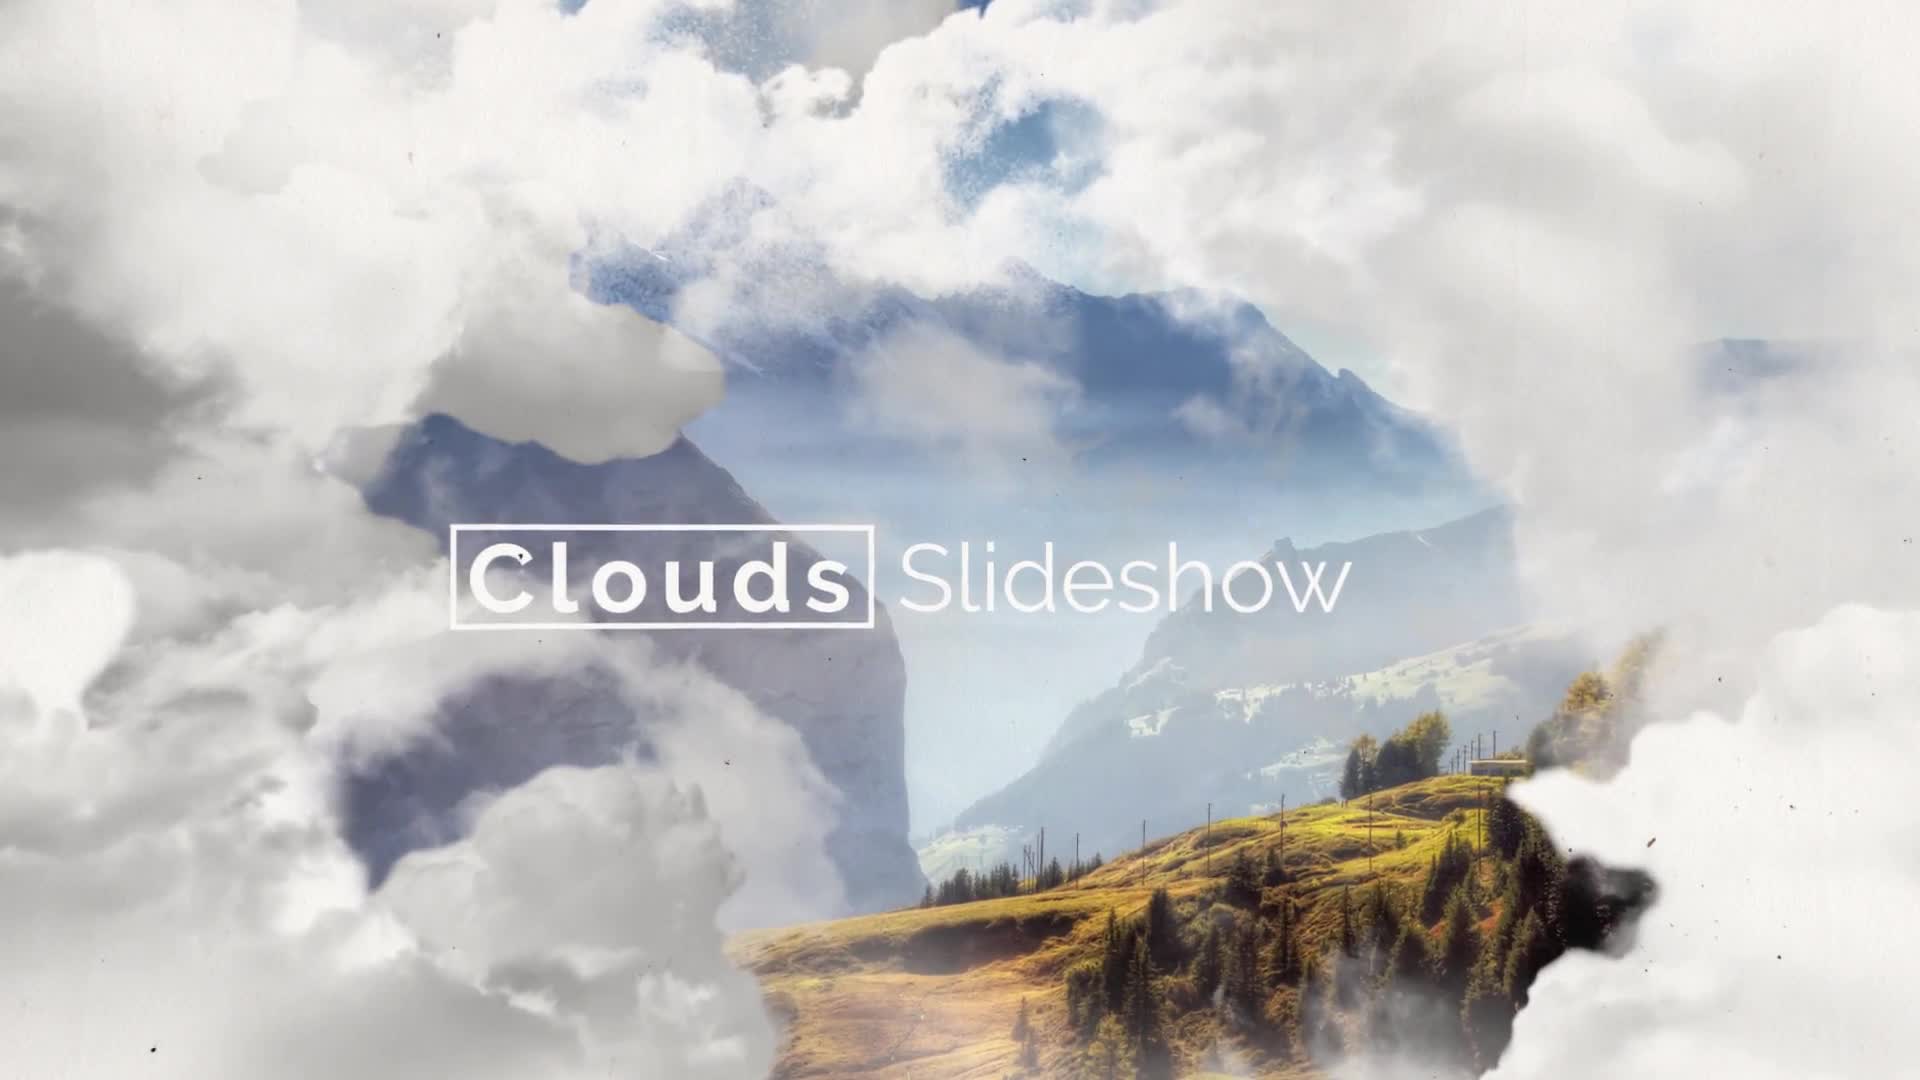 cloud photo slideshow after effects project template download